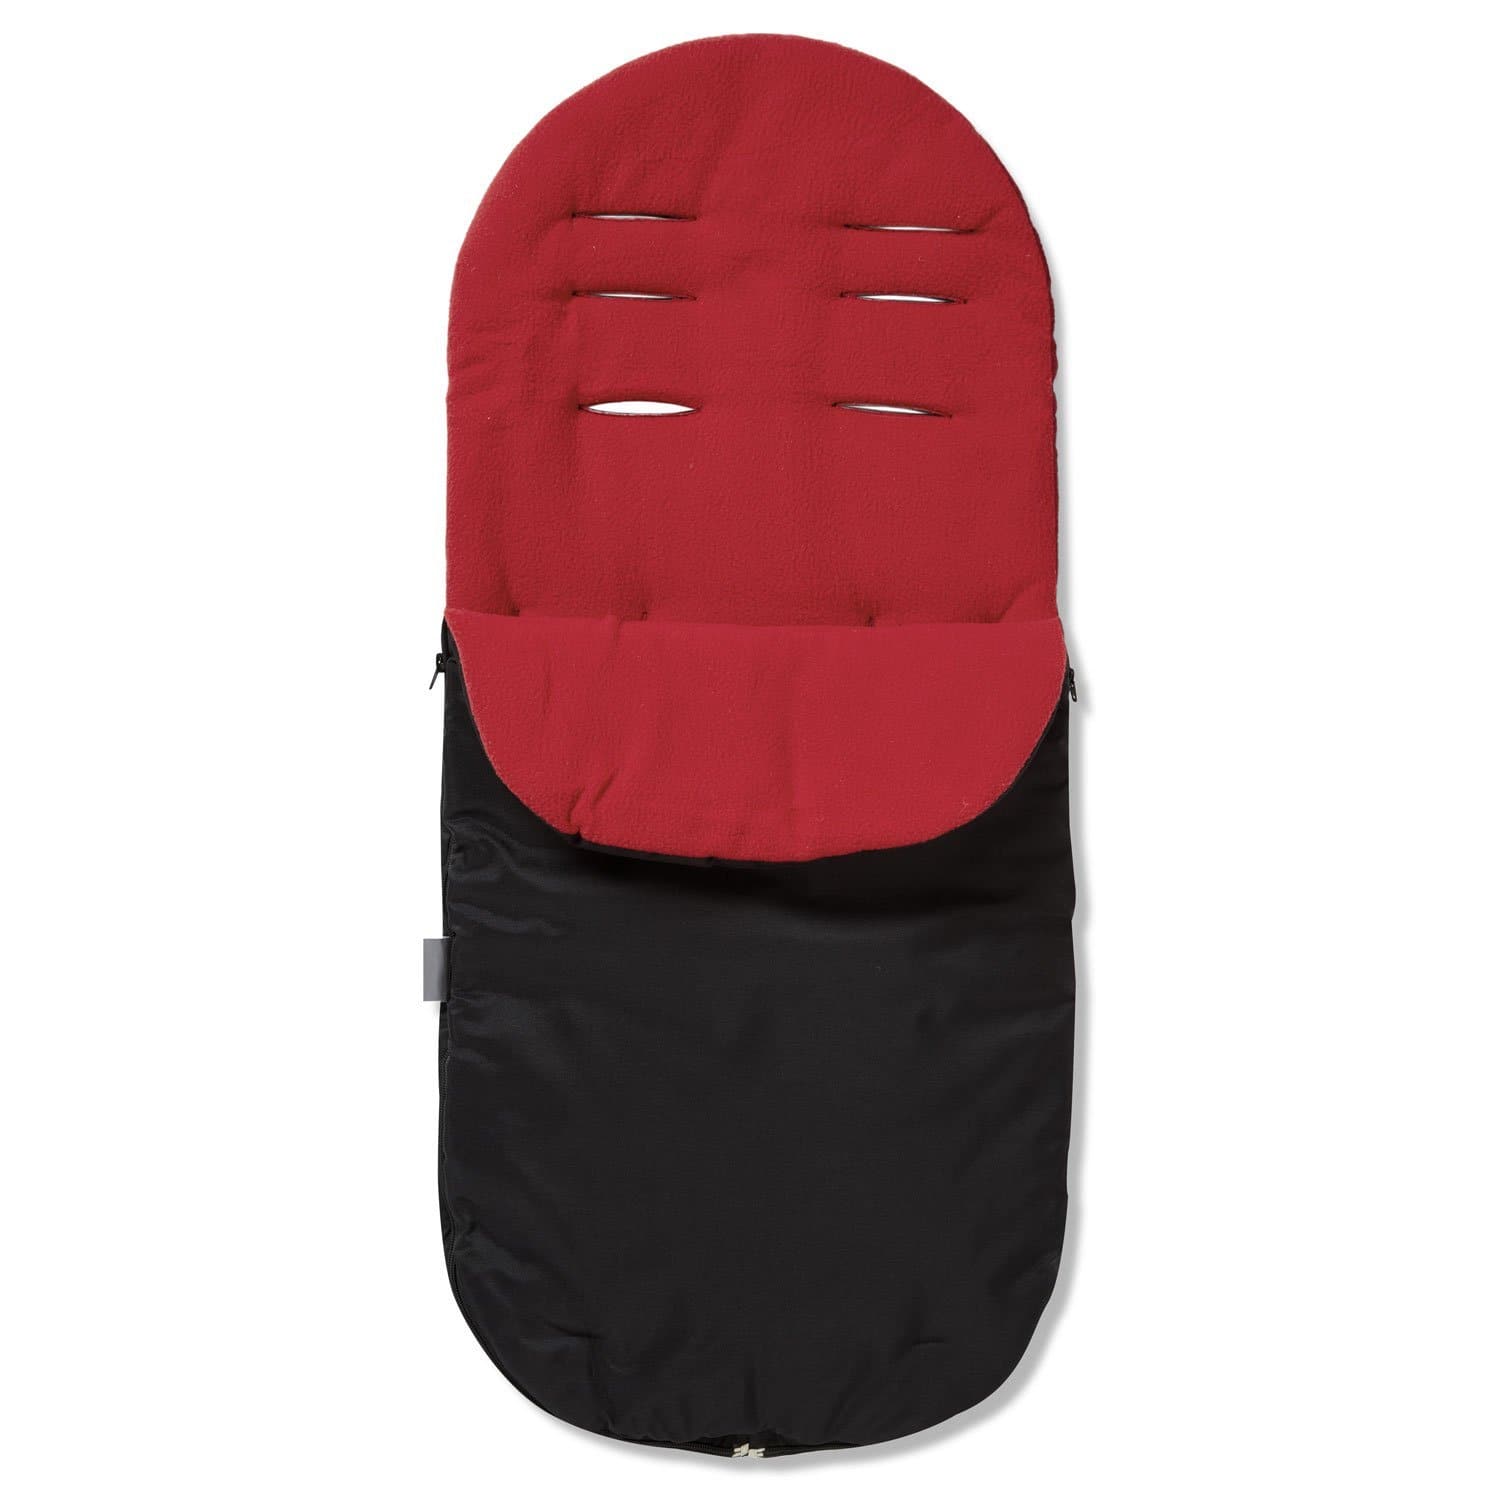 Footmuff / Cosy Toes Compatible with Combi - Red / Fits All Models | For Your Little One